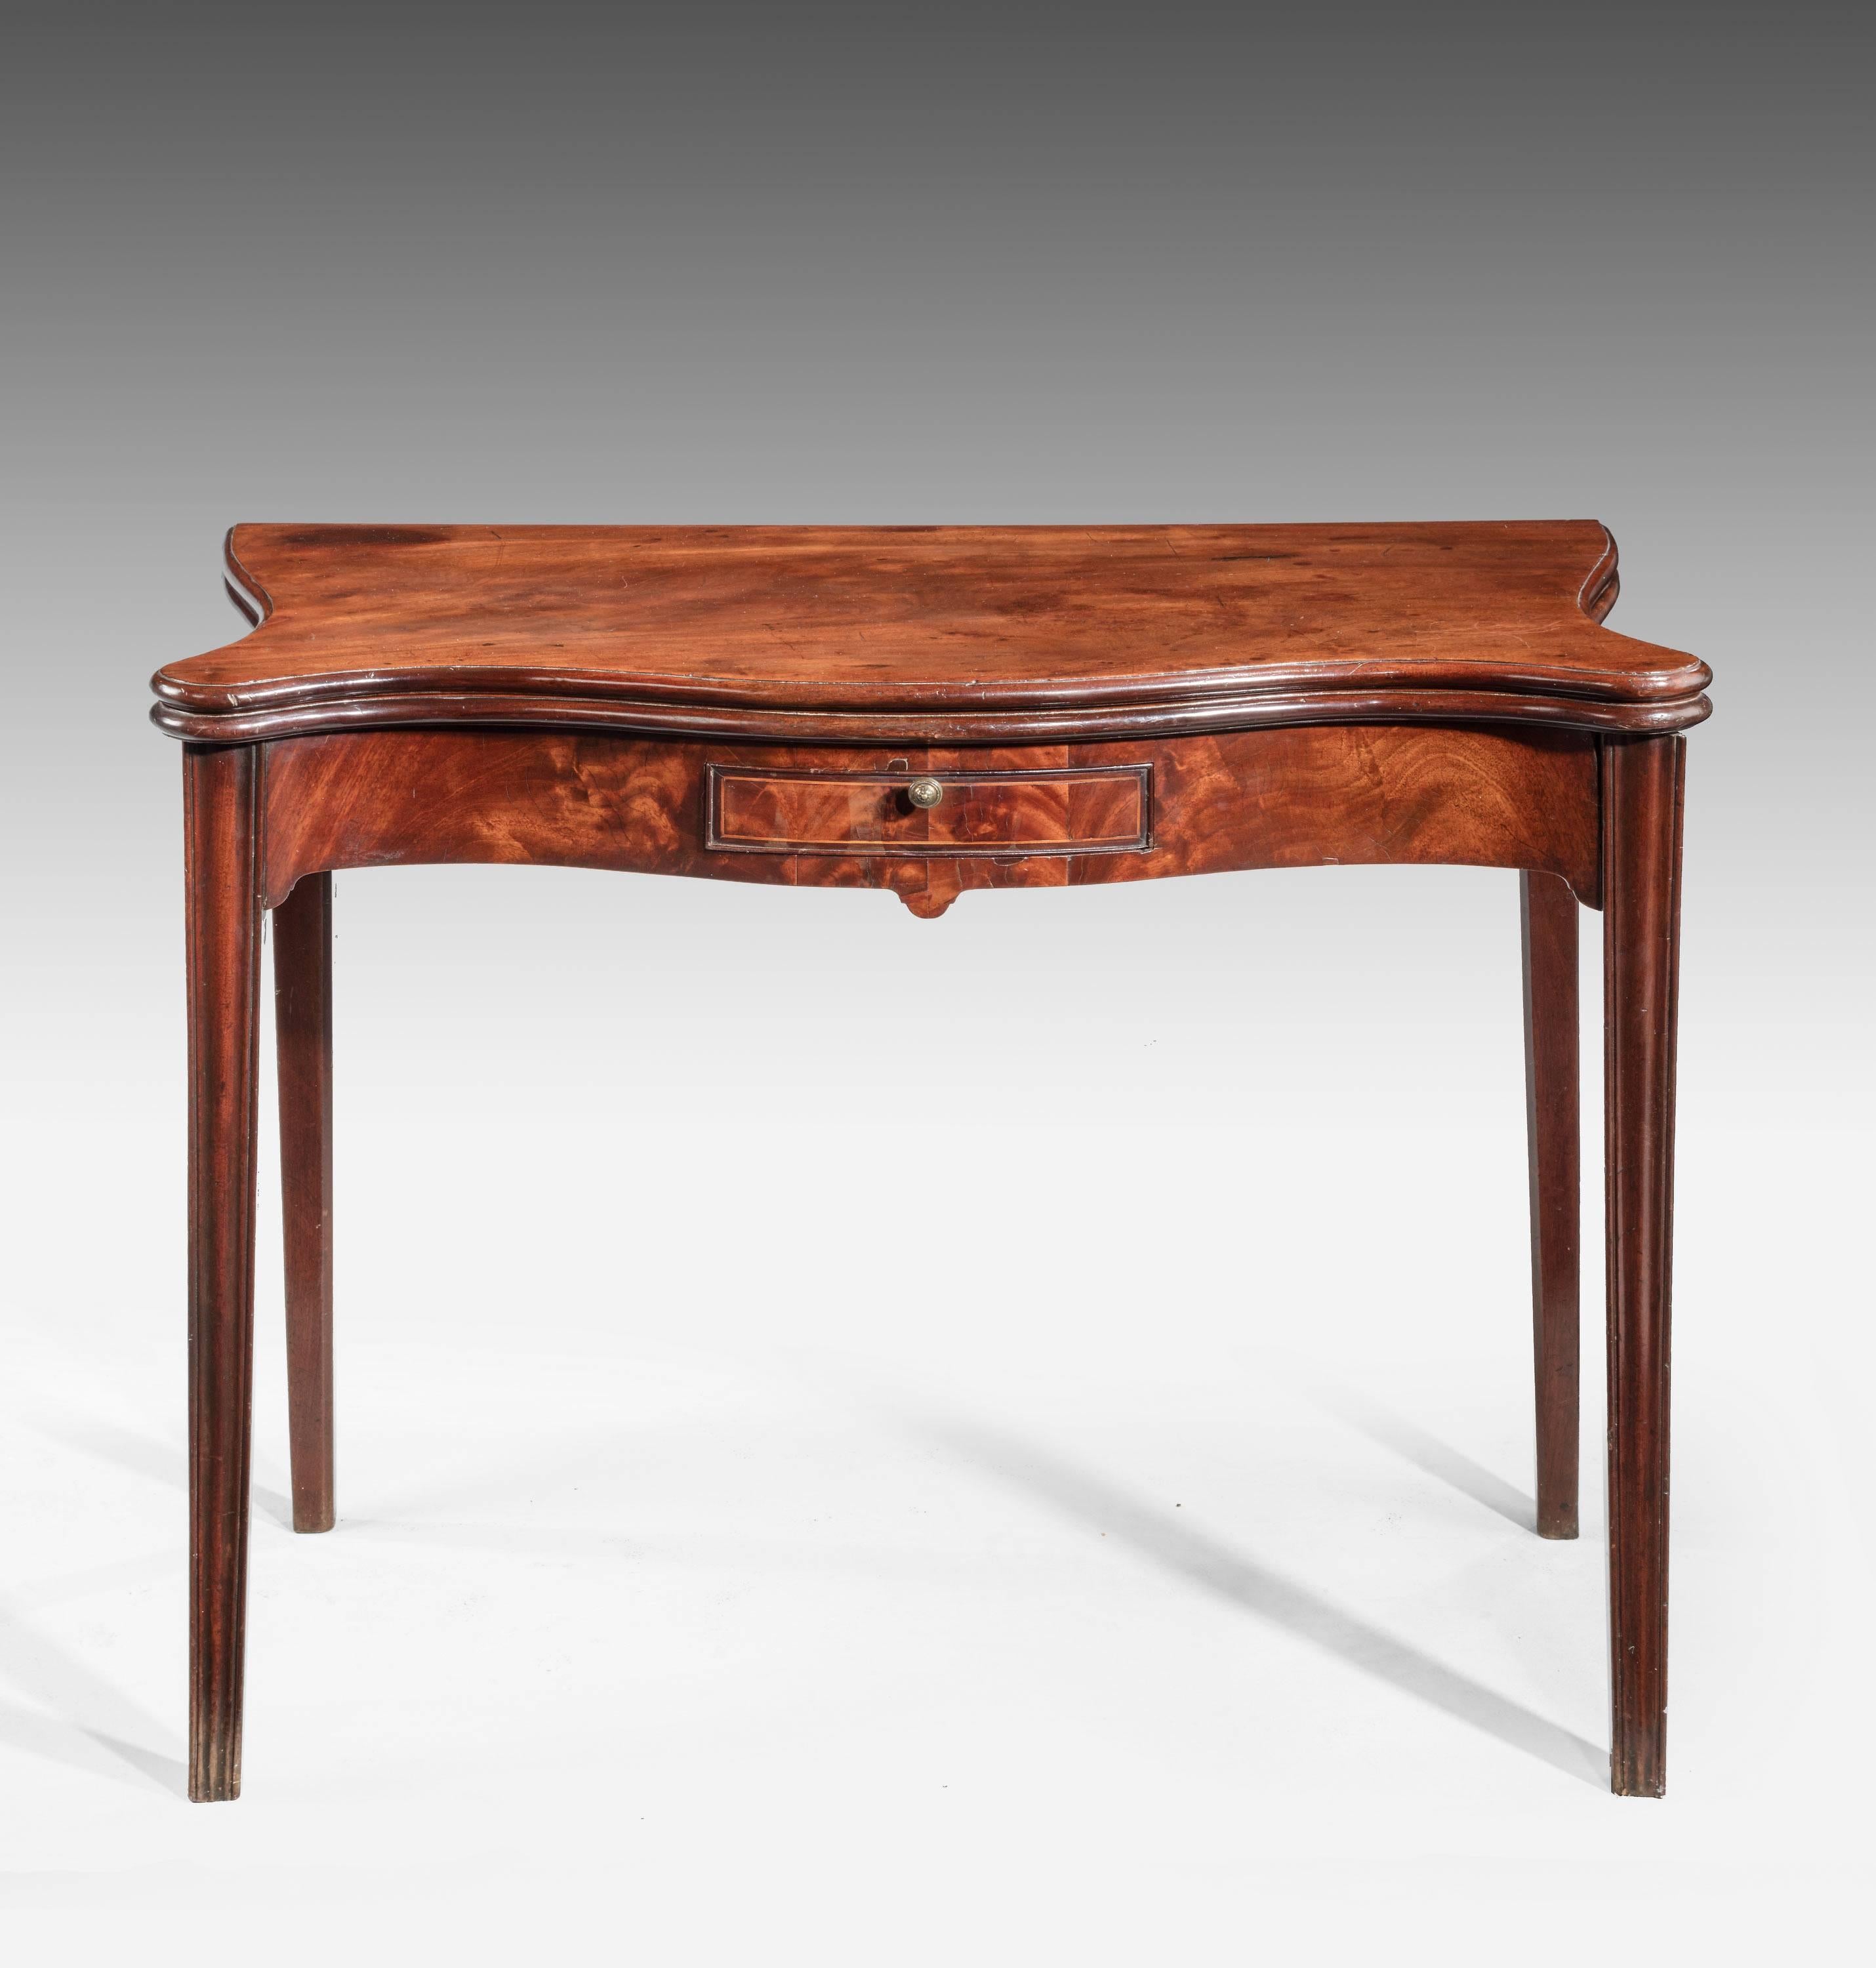 A fine Chippendale Period Serpentine Mahogany Tea Table. The very well figured top over square chamford supports. The Serpentine front with a drawer.